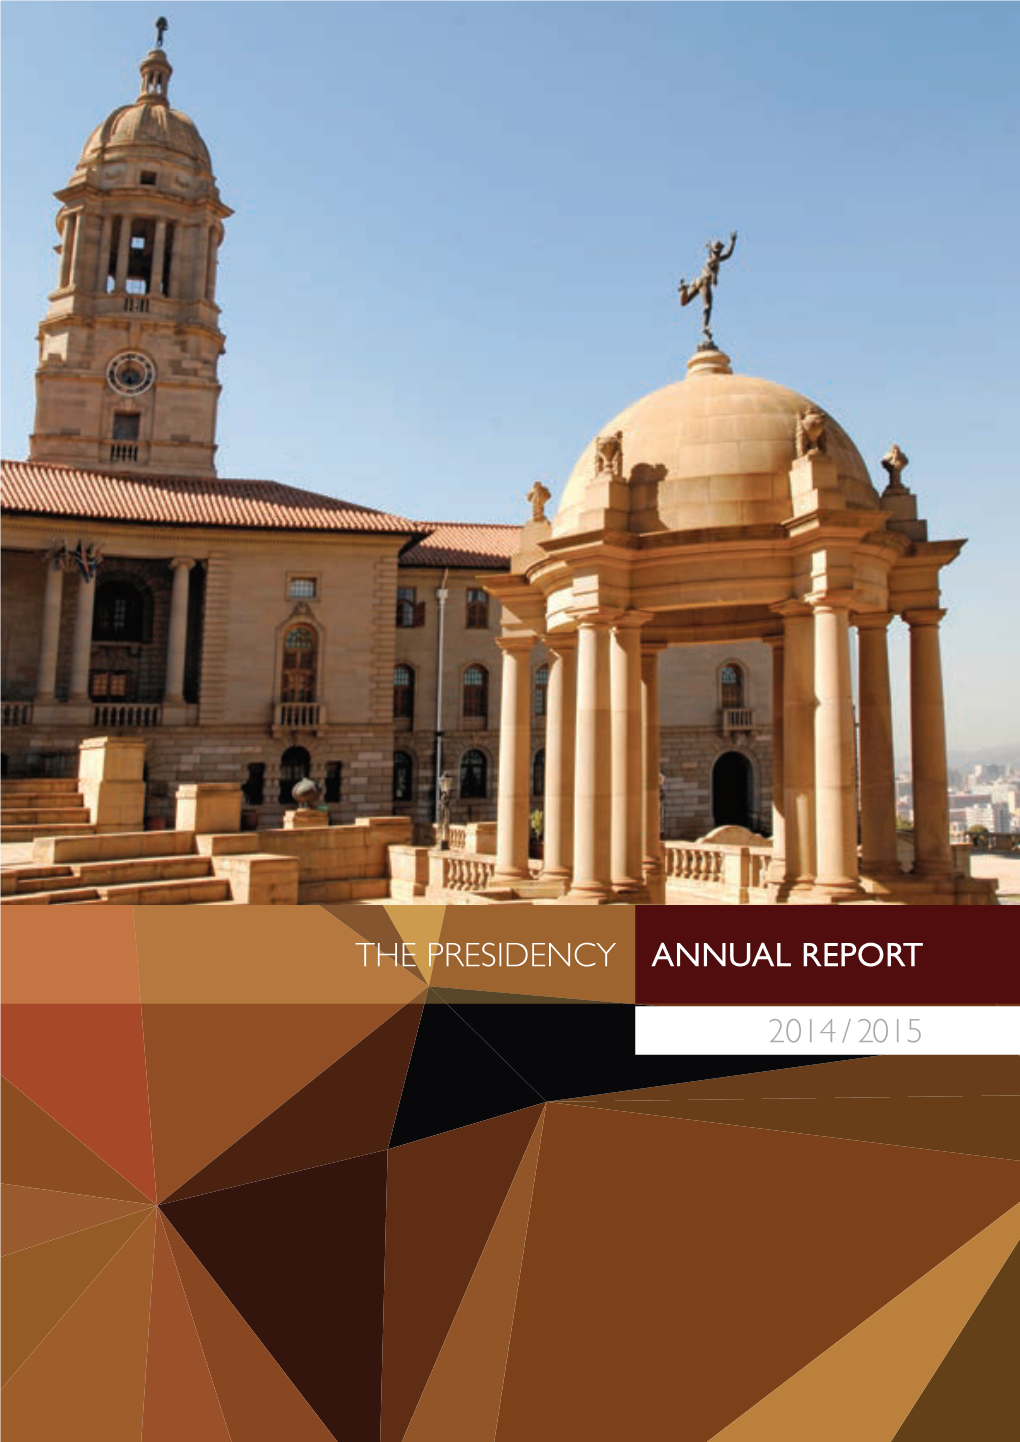 The Presidency Annual Report 2014/2015